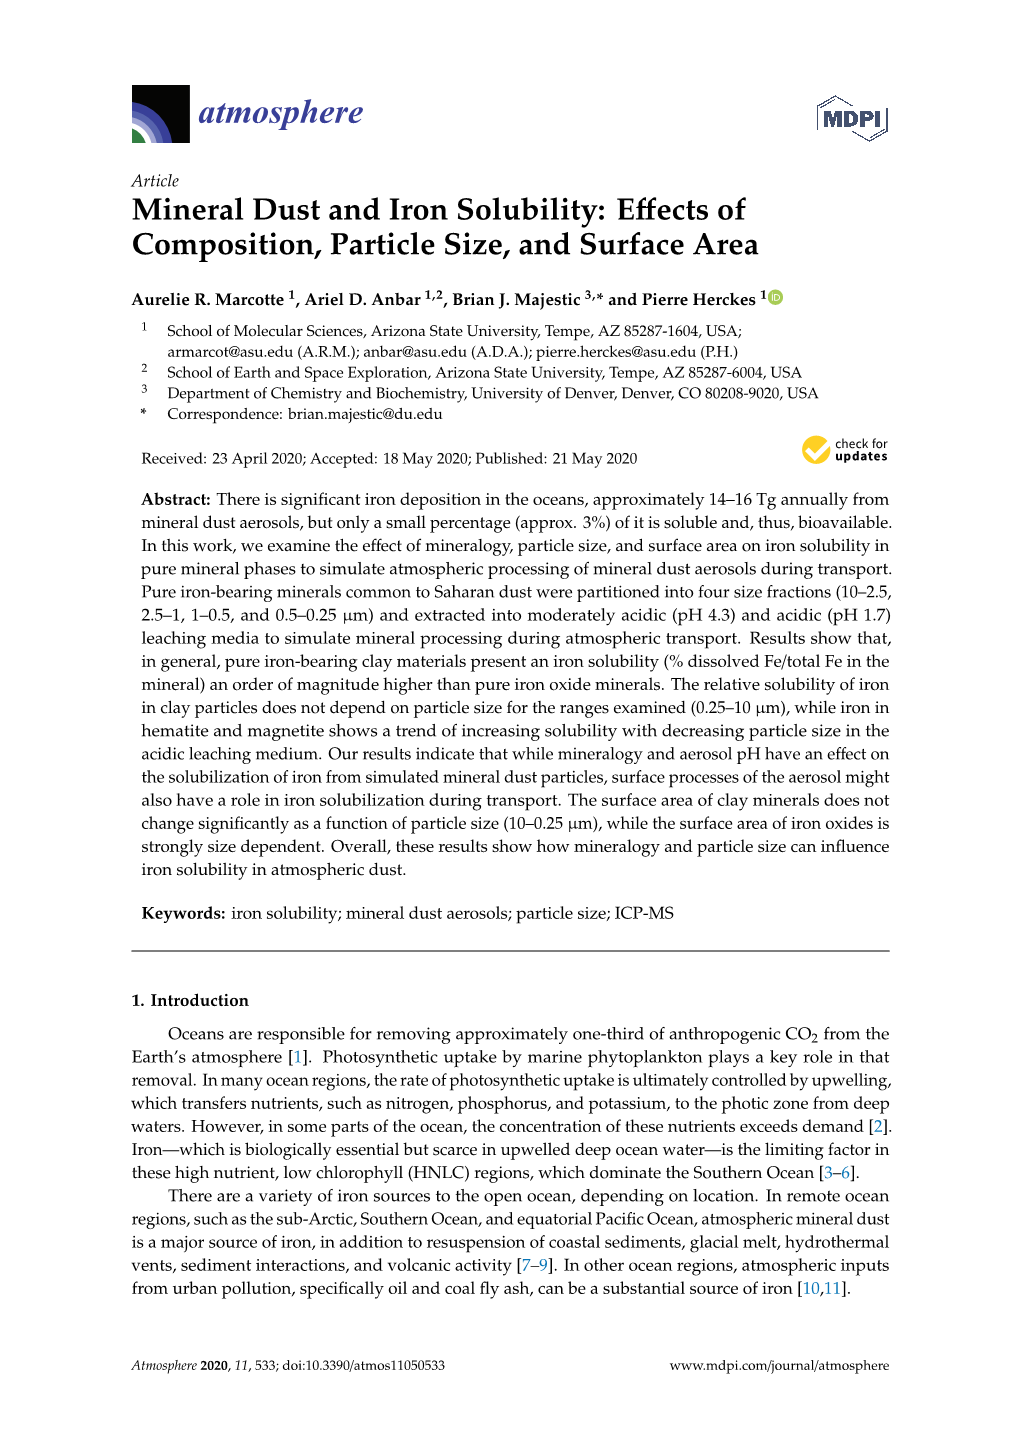 Mineral Dust and Iron Solubility: Effects of Composition, Particle Size